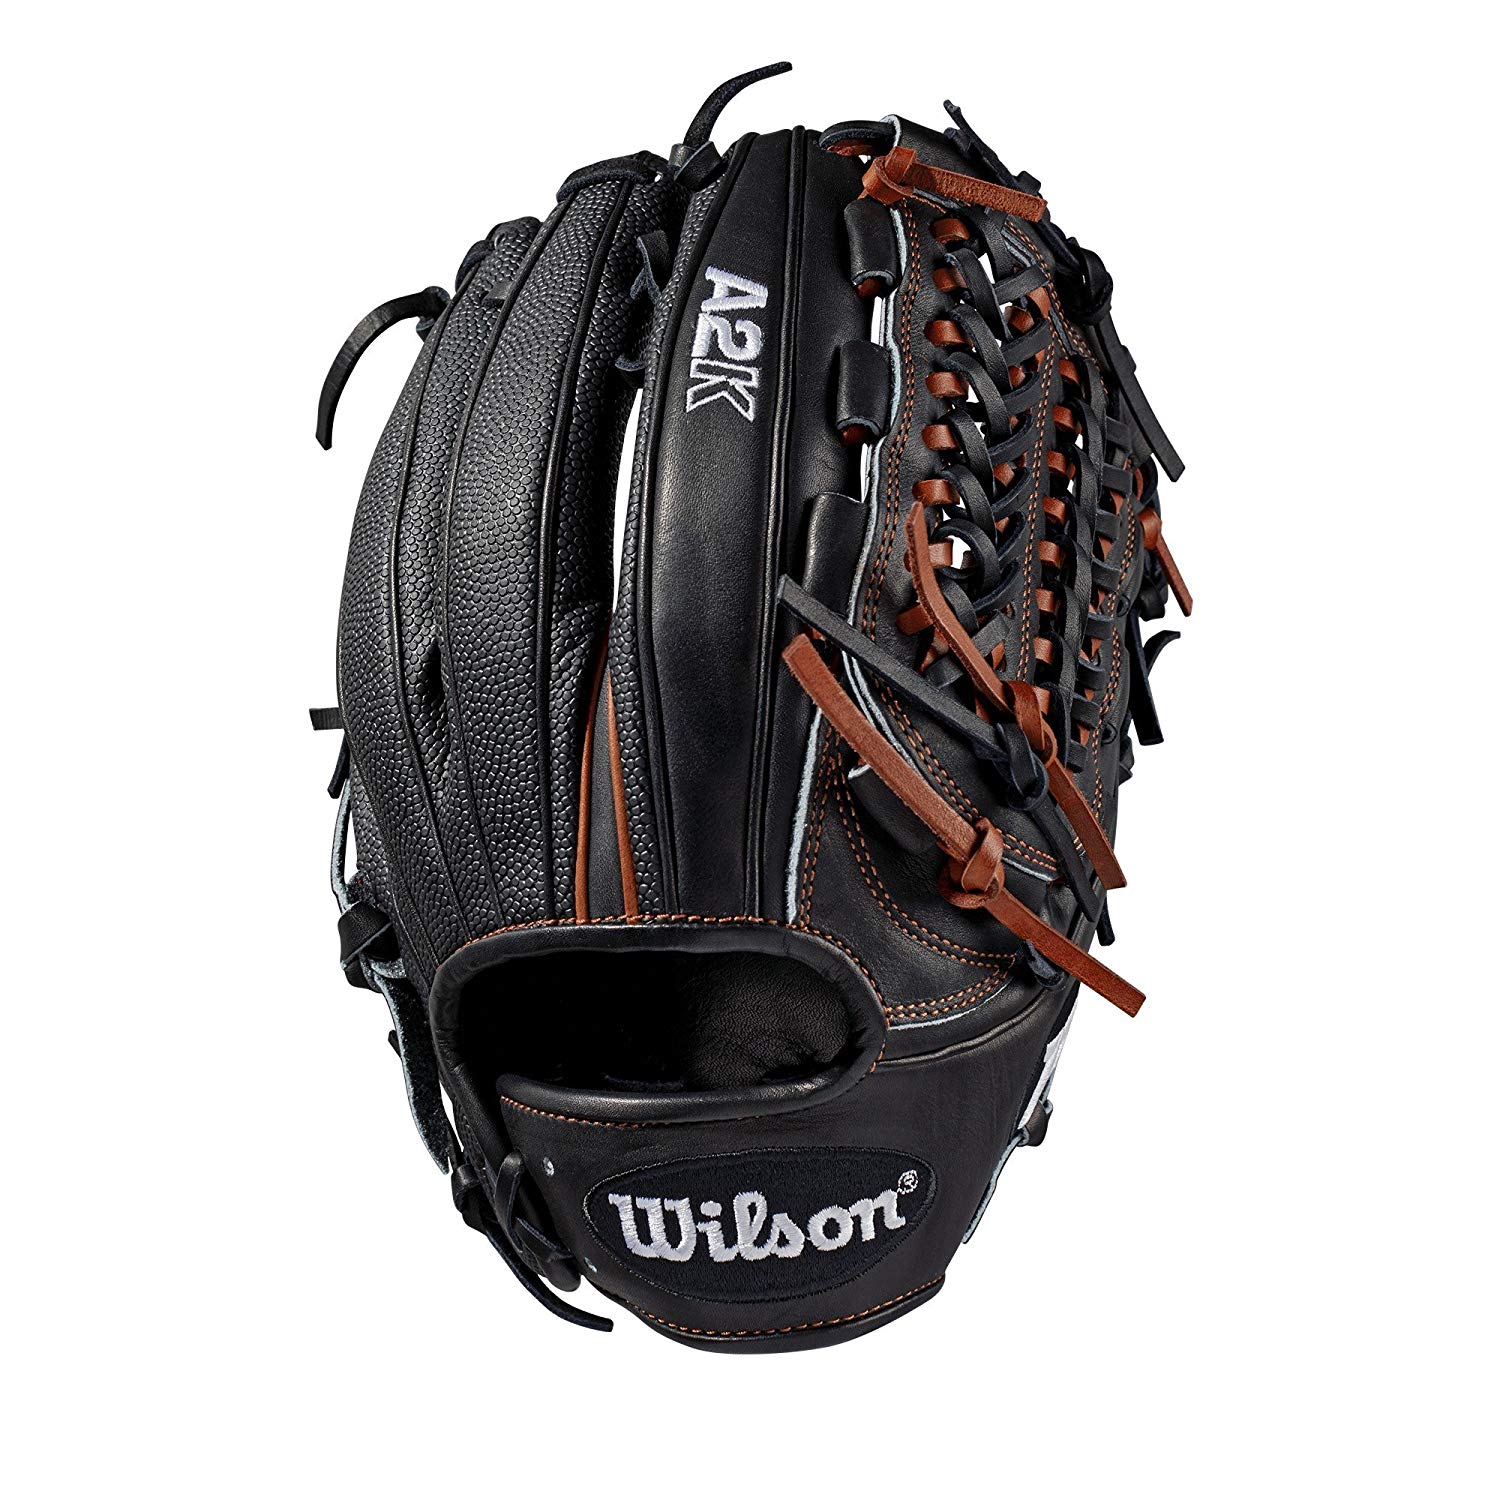 Pitcher model; closed Pro laced web; available in right- and left-hand Throw Black SuperSkin, twice as strong as regular leather, but half the weight Black Pro Stock Select leather, chosen for its consistency and flawlessness Rolled dual welting for long-lasting shape and quicker break-in Double palm construction, providing maximum pocket stability and 3x more shaping to help reduce break-in time.